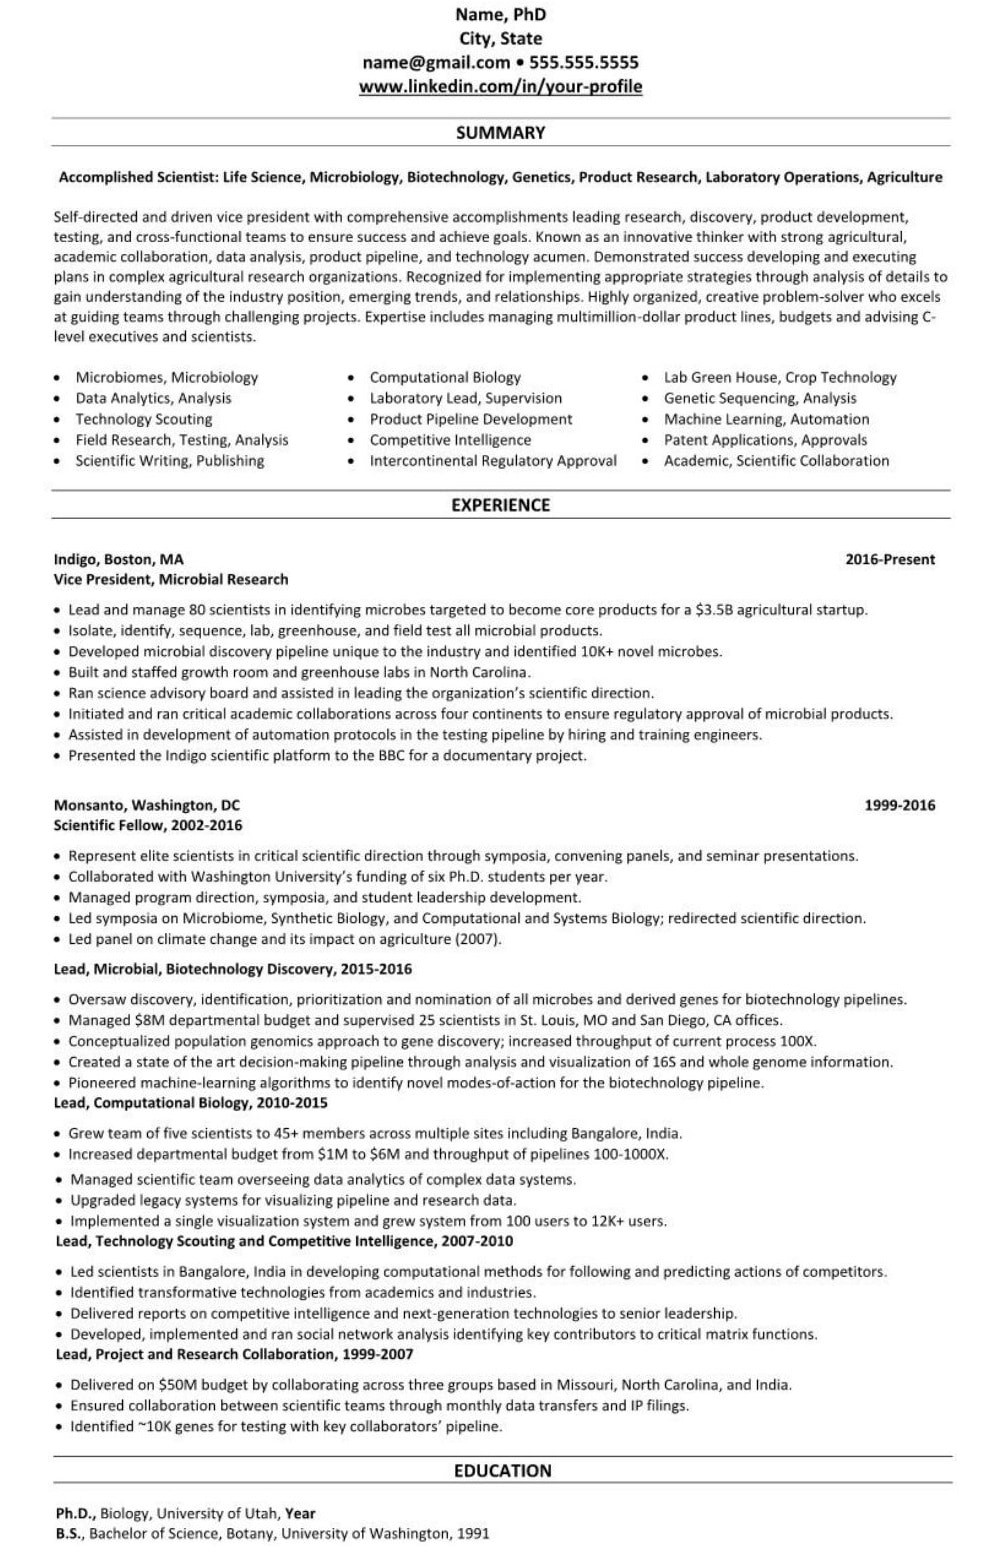 Resume Sample for Biotech Research assistant Jobs Linkedin Profile & Resume Sample: Biotechnology, Life Sciences …